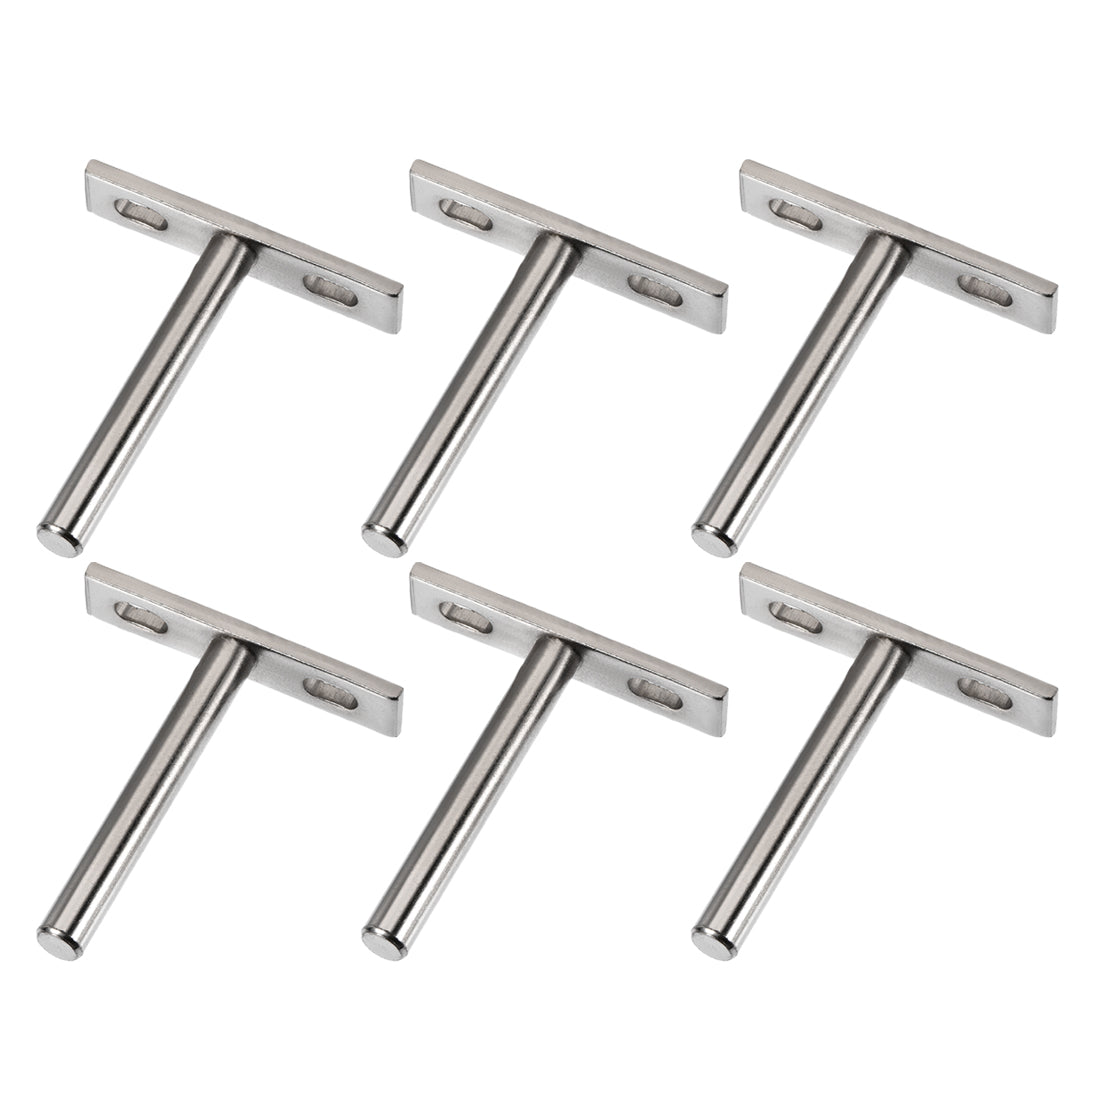 uxcell Uxcell Floating Shelf Invisible Support Bracket Round Shank 79mm Hardened Concealed Wall Support Set 6 Pcs